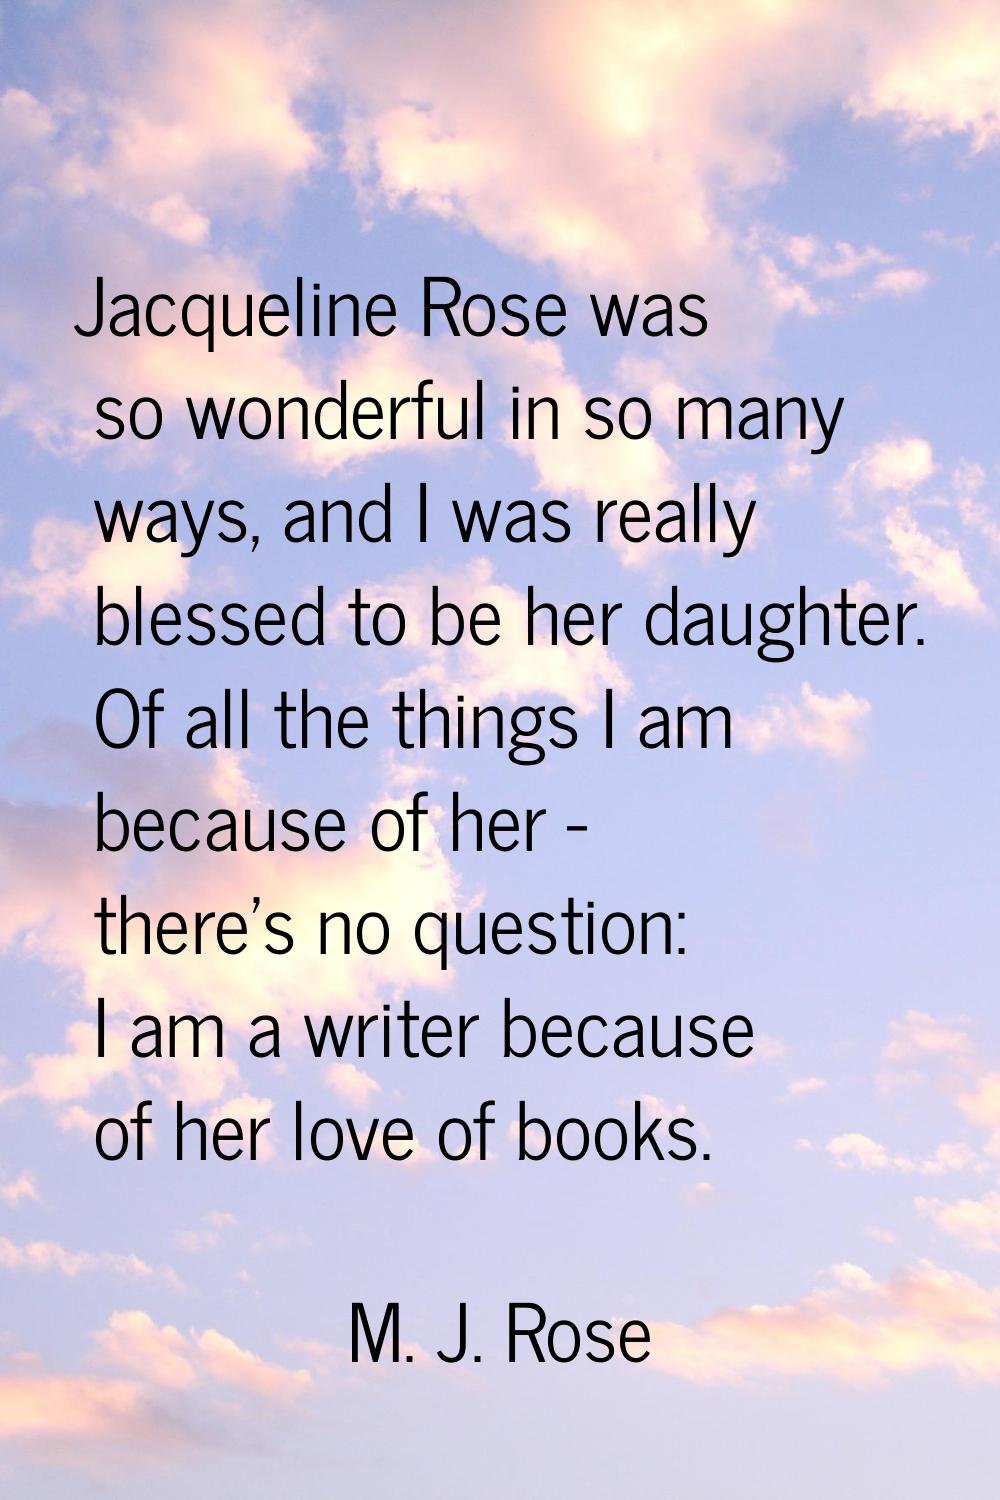 Jacqueline Rose was so wonderful in so many ways, and I was really blessed to be her daughter. Of a